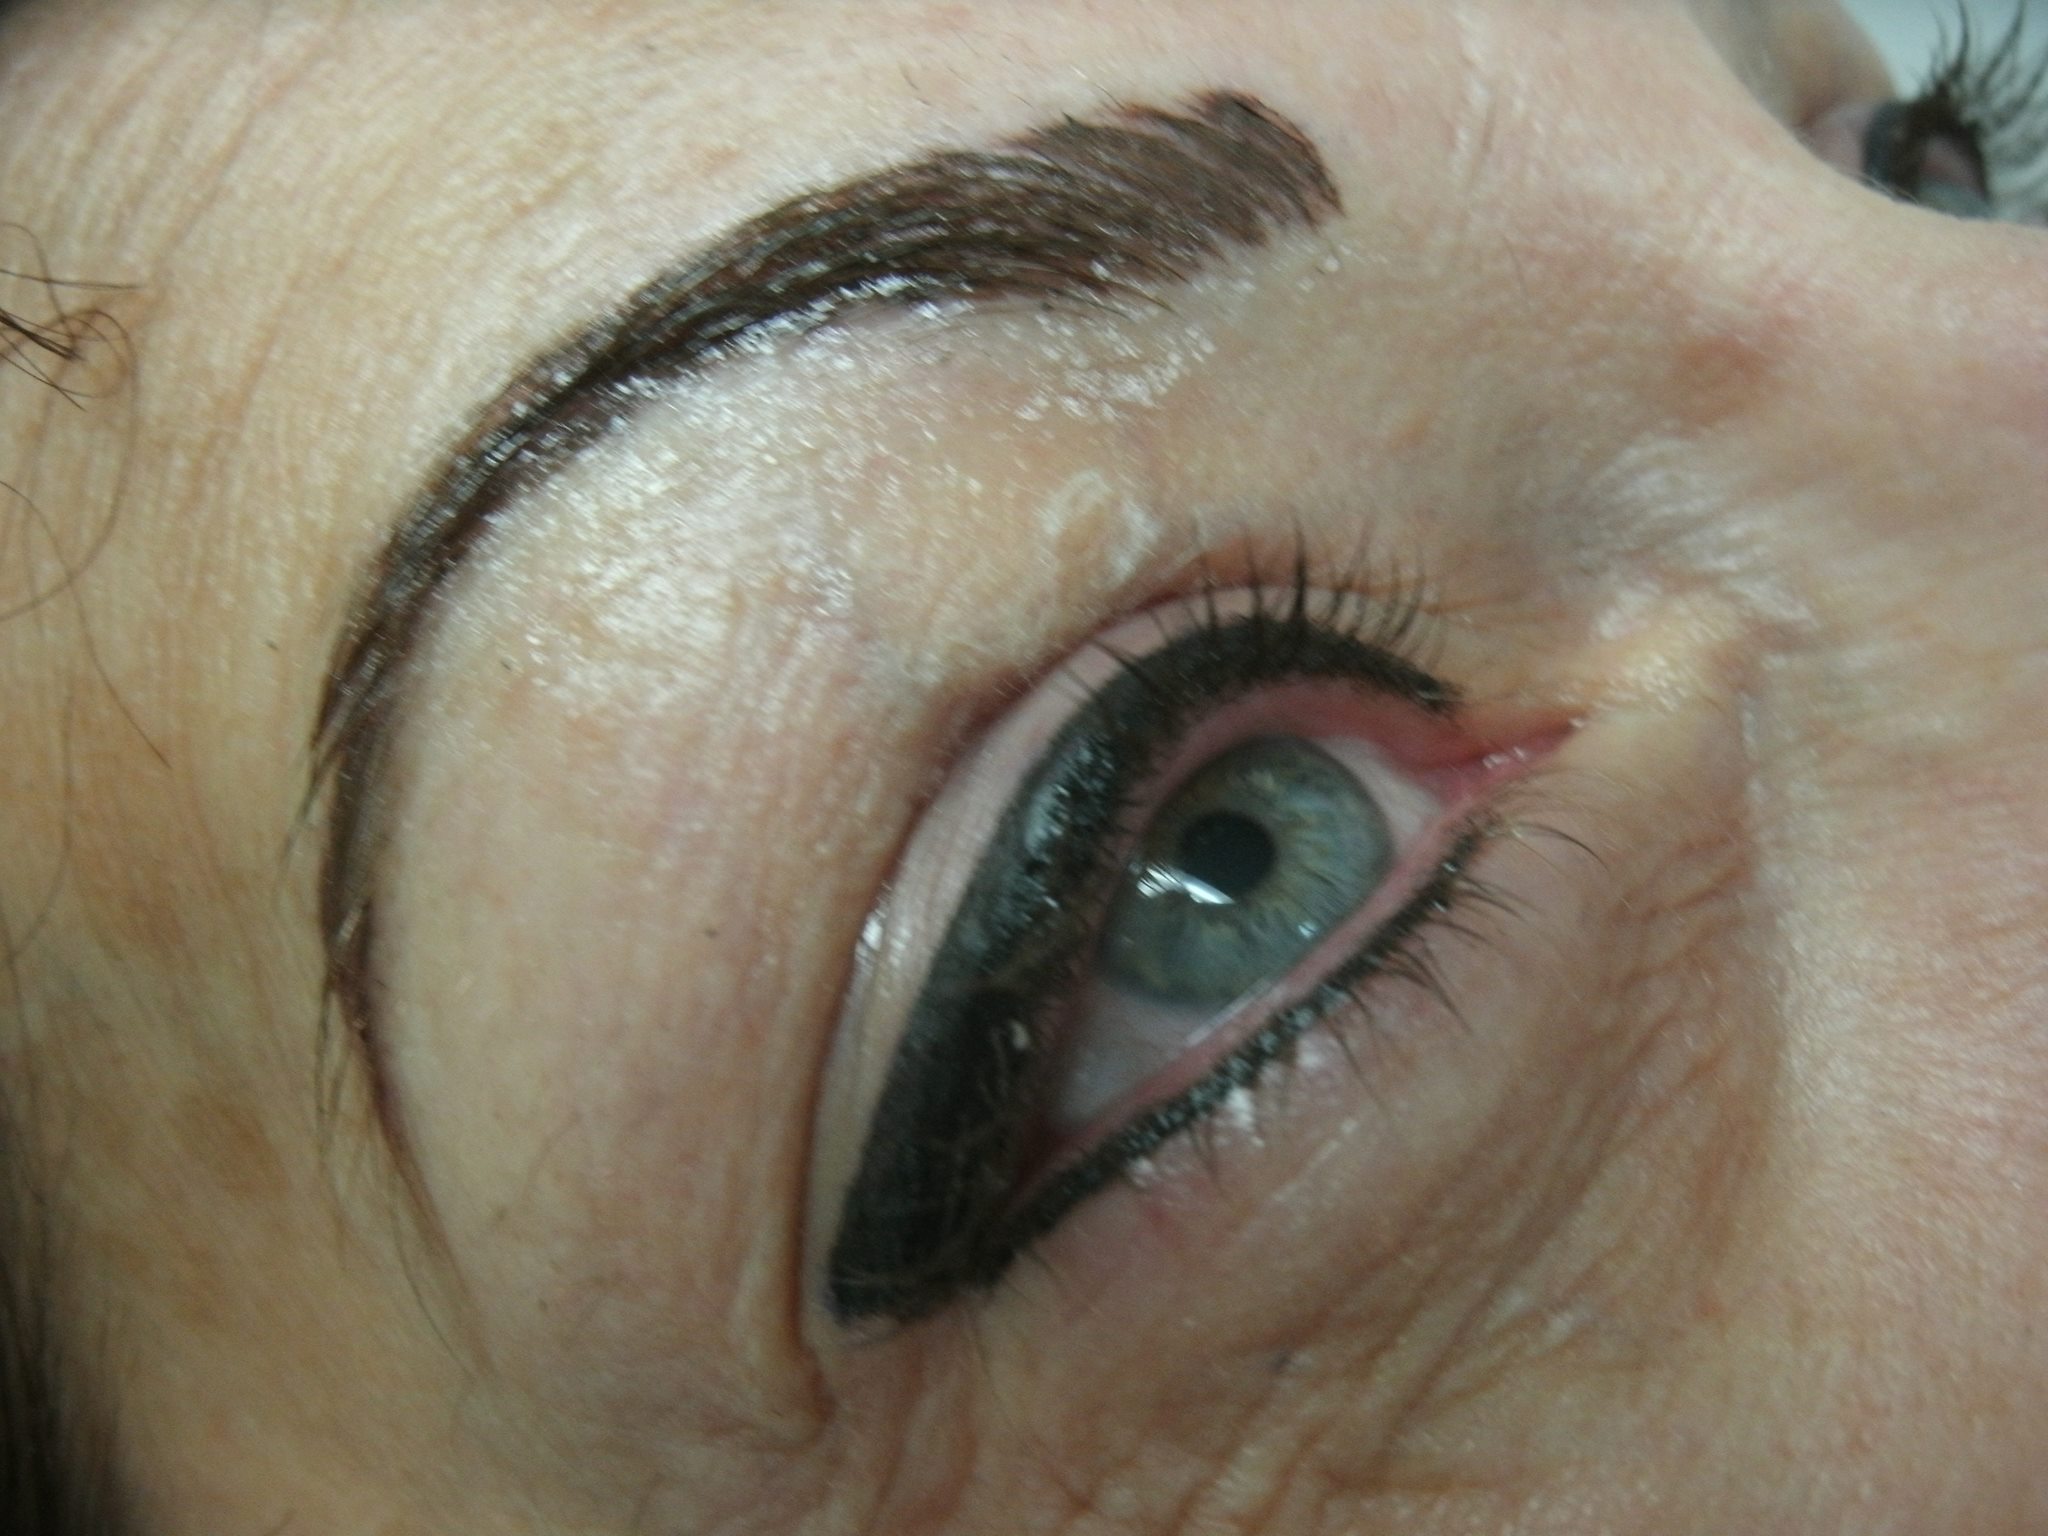 Don't miss out! Professional Permanent Eyeliner near Eau Claire, WI